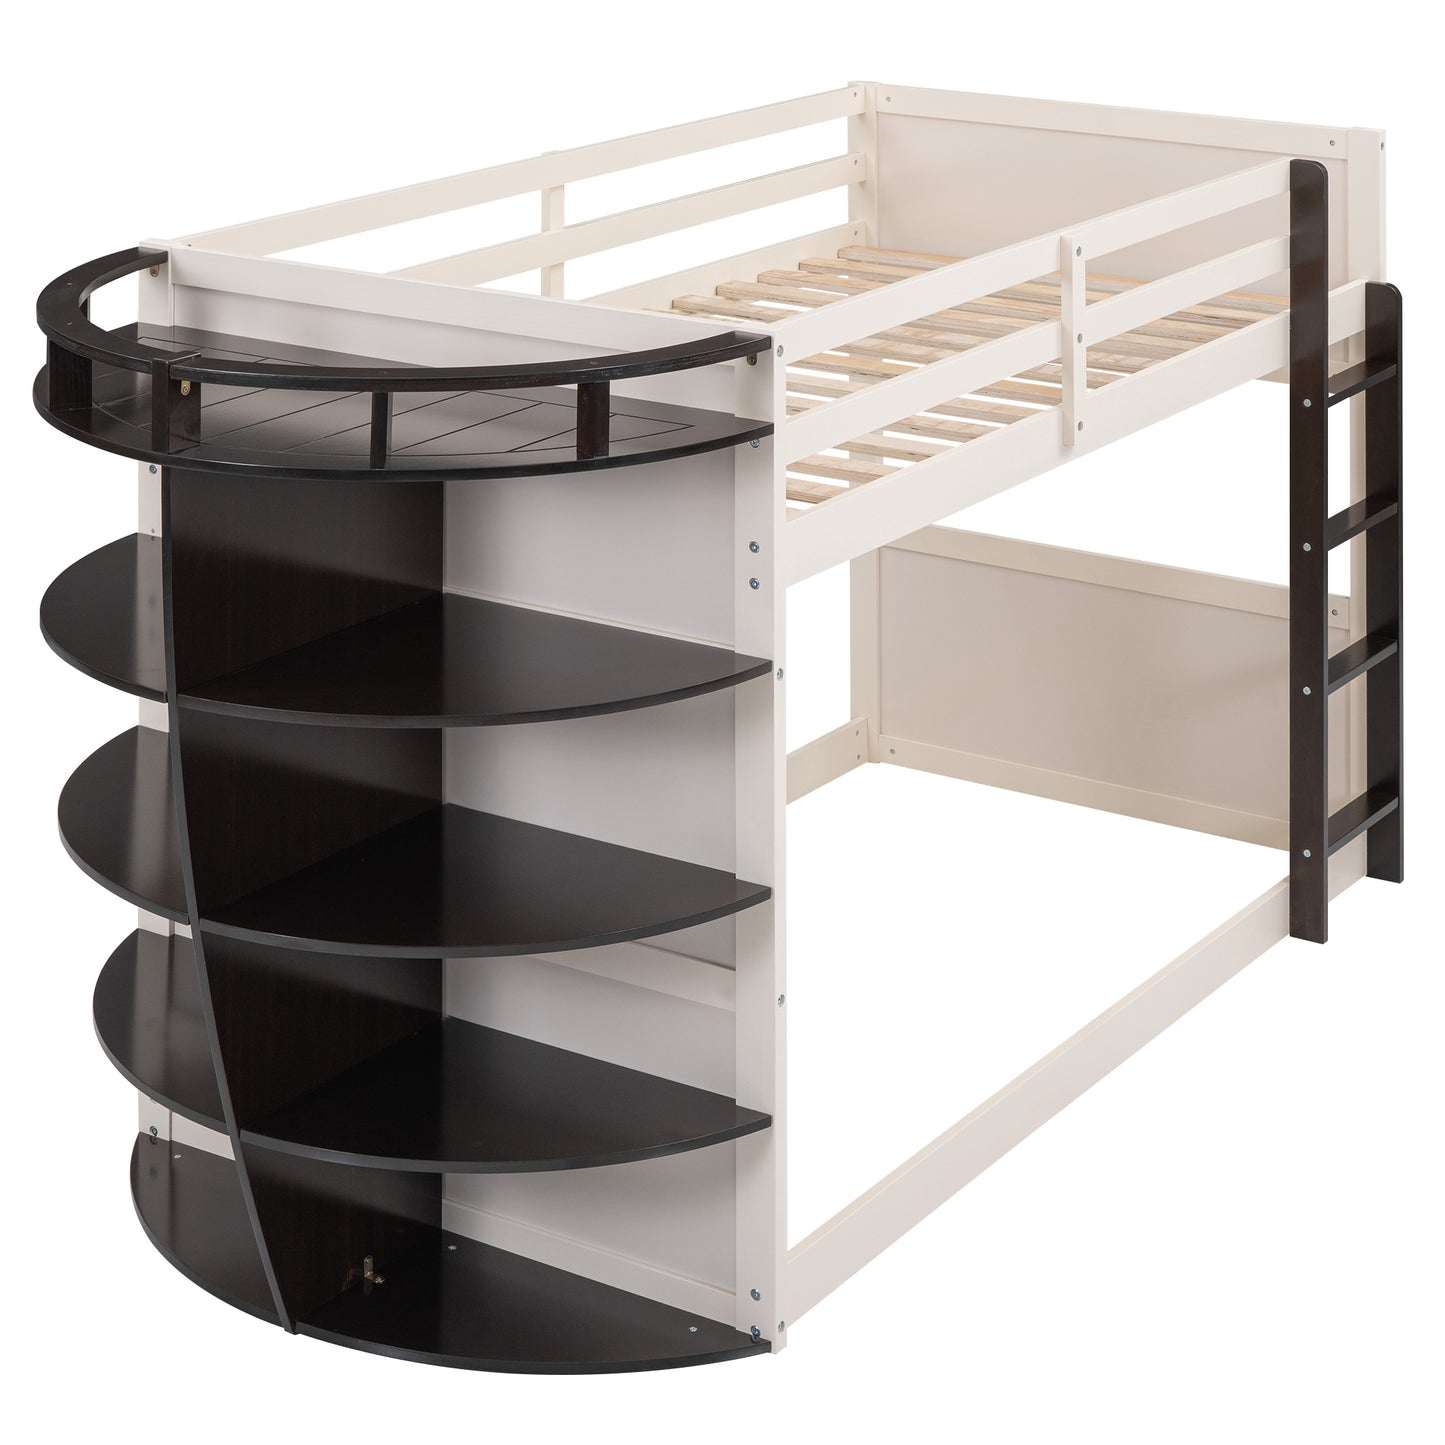 Twin over Twin Boat-Like Shape Bunk Bed with Storage Shelves, Cream+Espresso